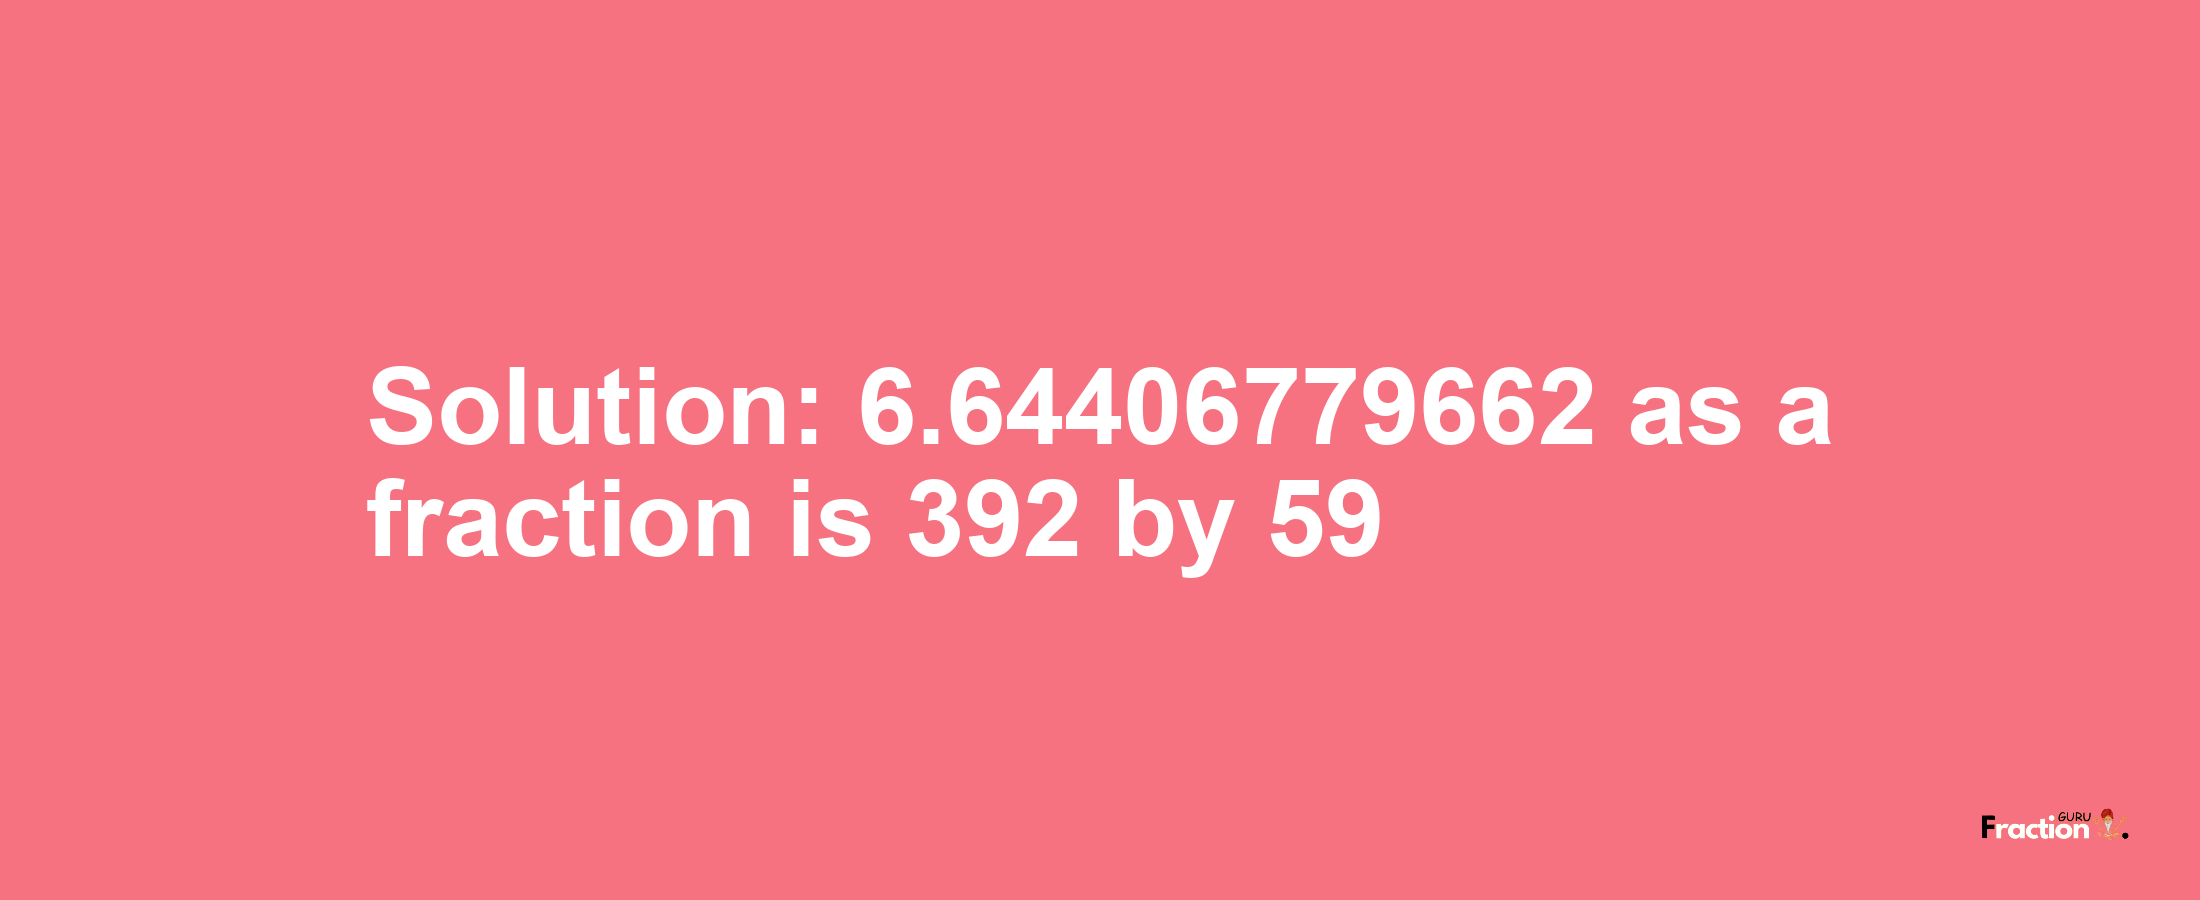 Solution:6.64406779662 as a fraction is 392/59